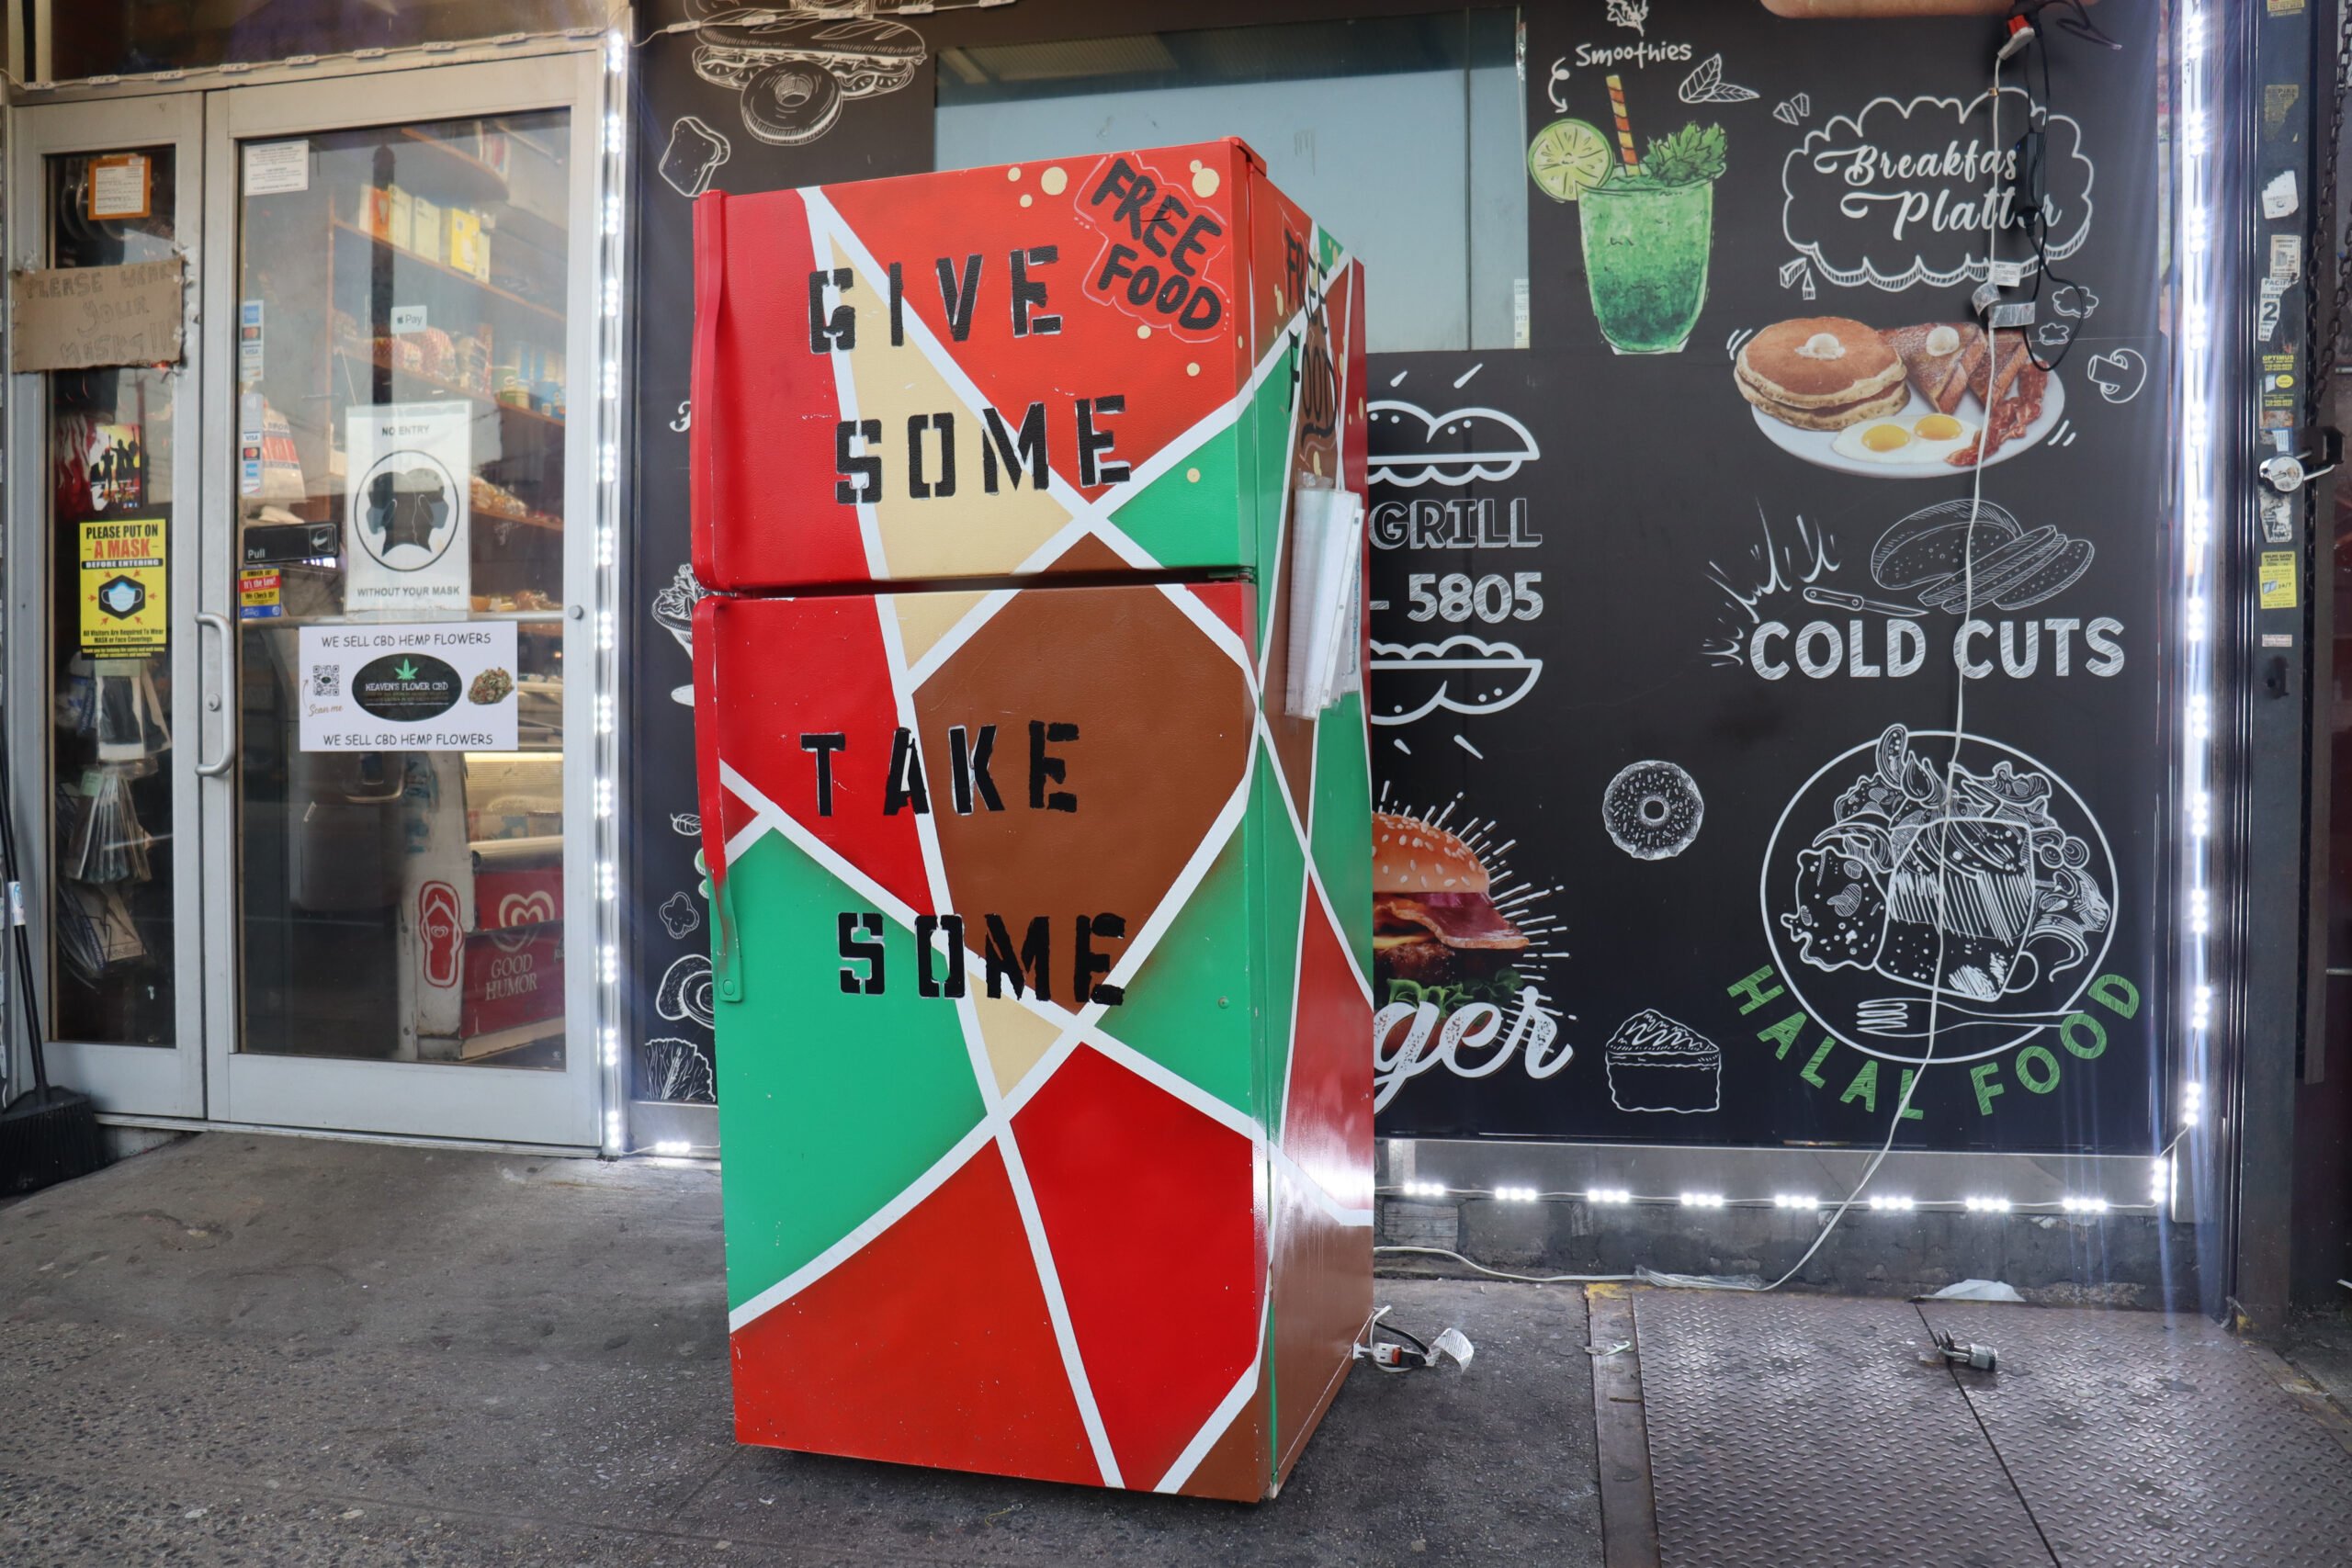 A community fridge painted red, green, brown and yellow in a mosaic-like pattern reads "Free food. Give some, take some." It appears to be outside a deli or restaurant.